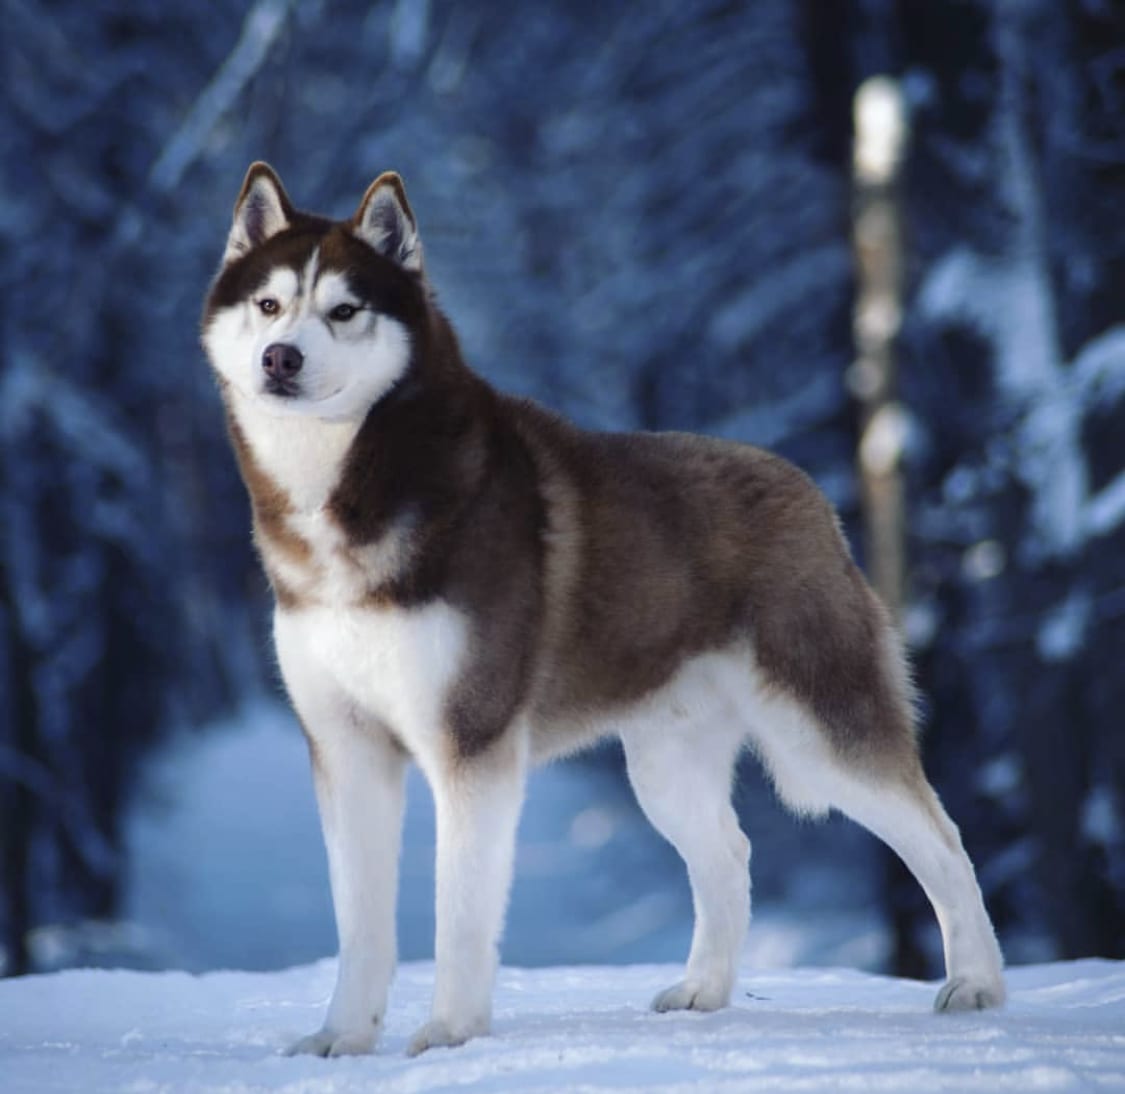 A Husky standing in snow in the forest